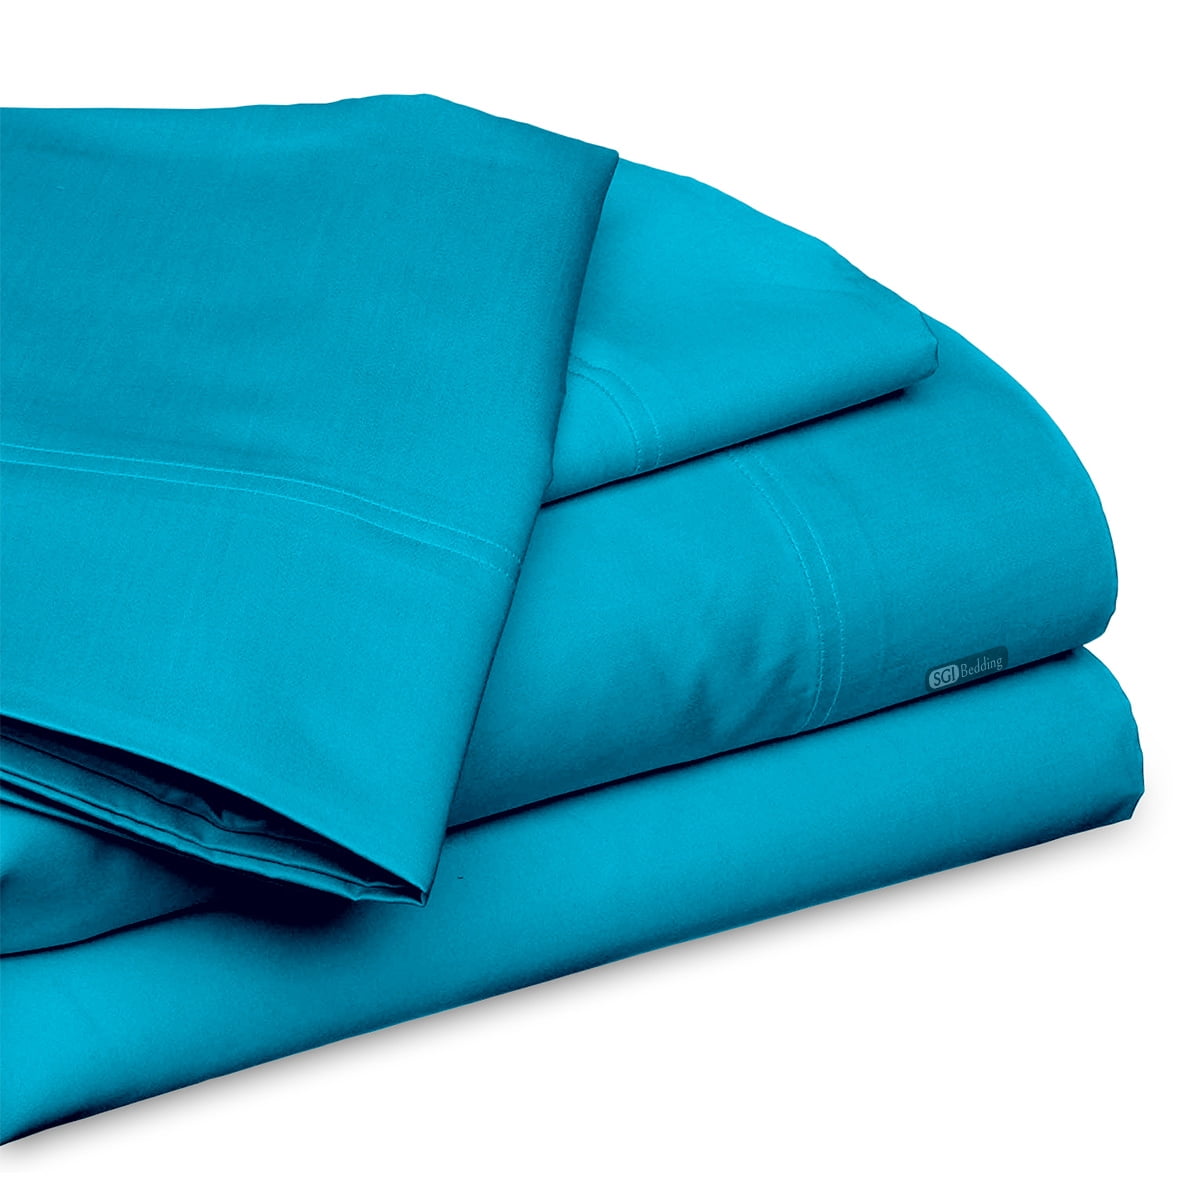 Extra Deep Pocket 4 Piece Bed Sheet Set 1000 TC 100% Cotton Turquoise Blue solid 